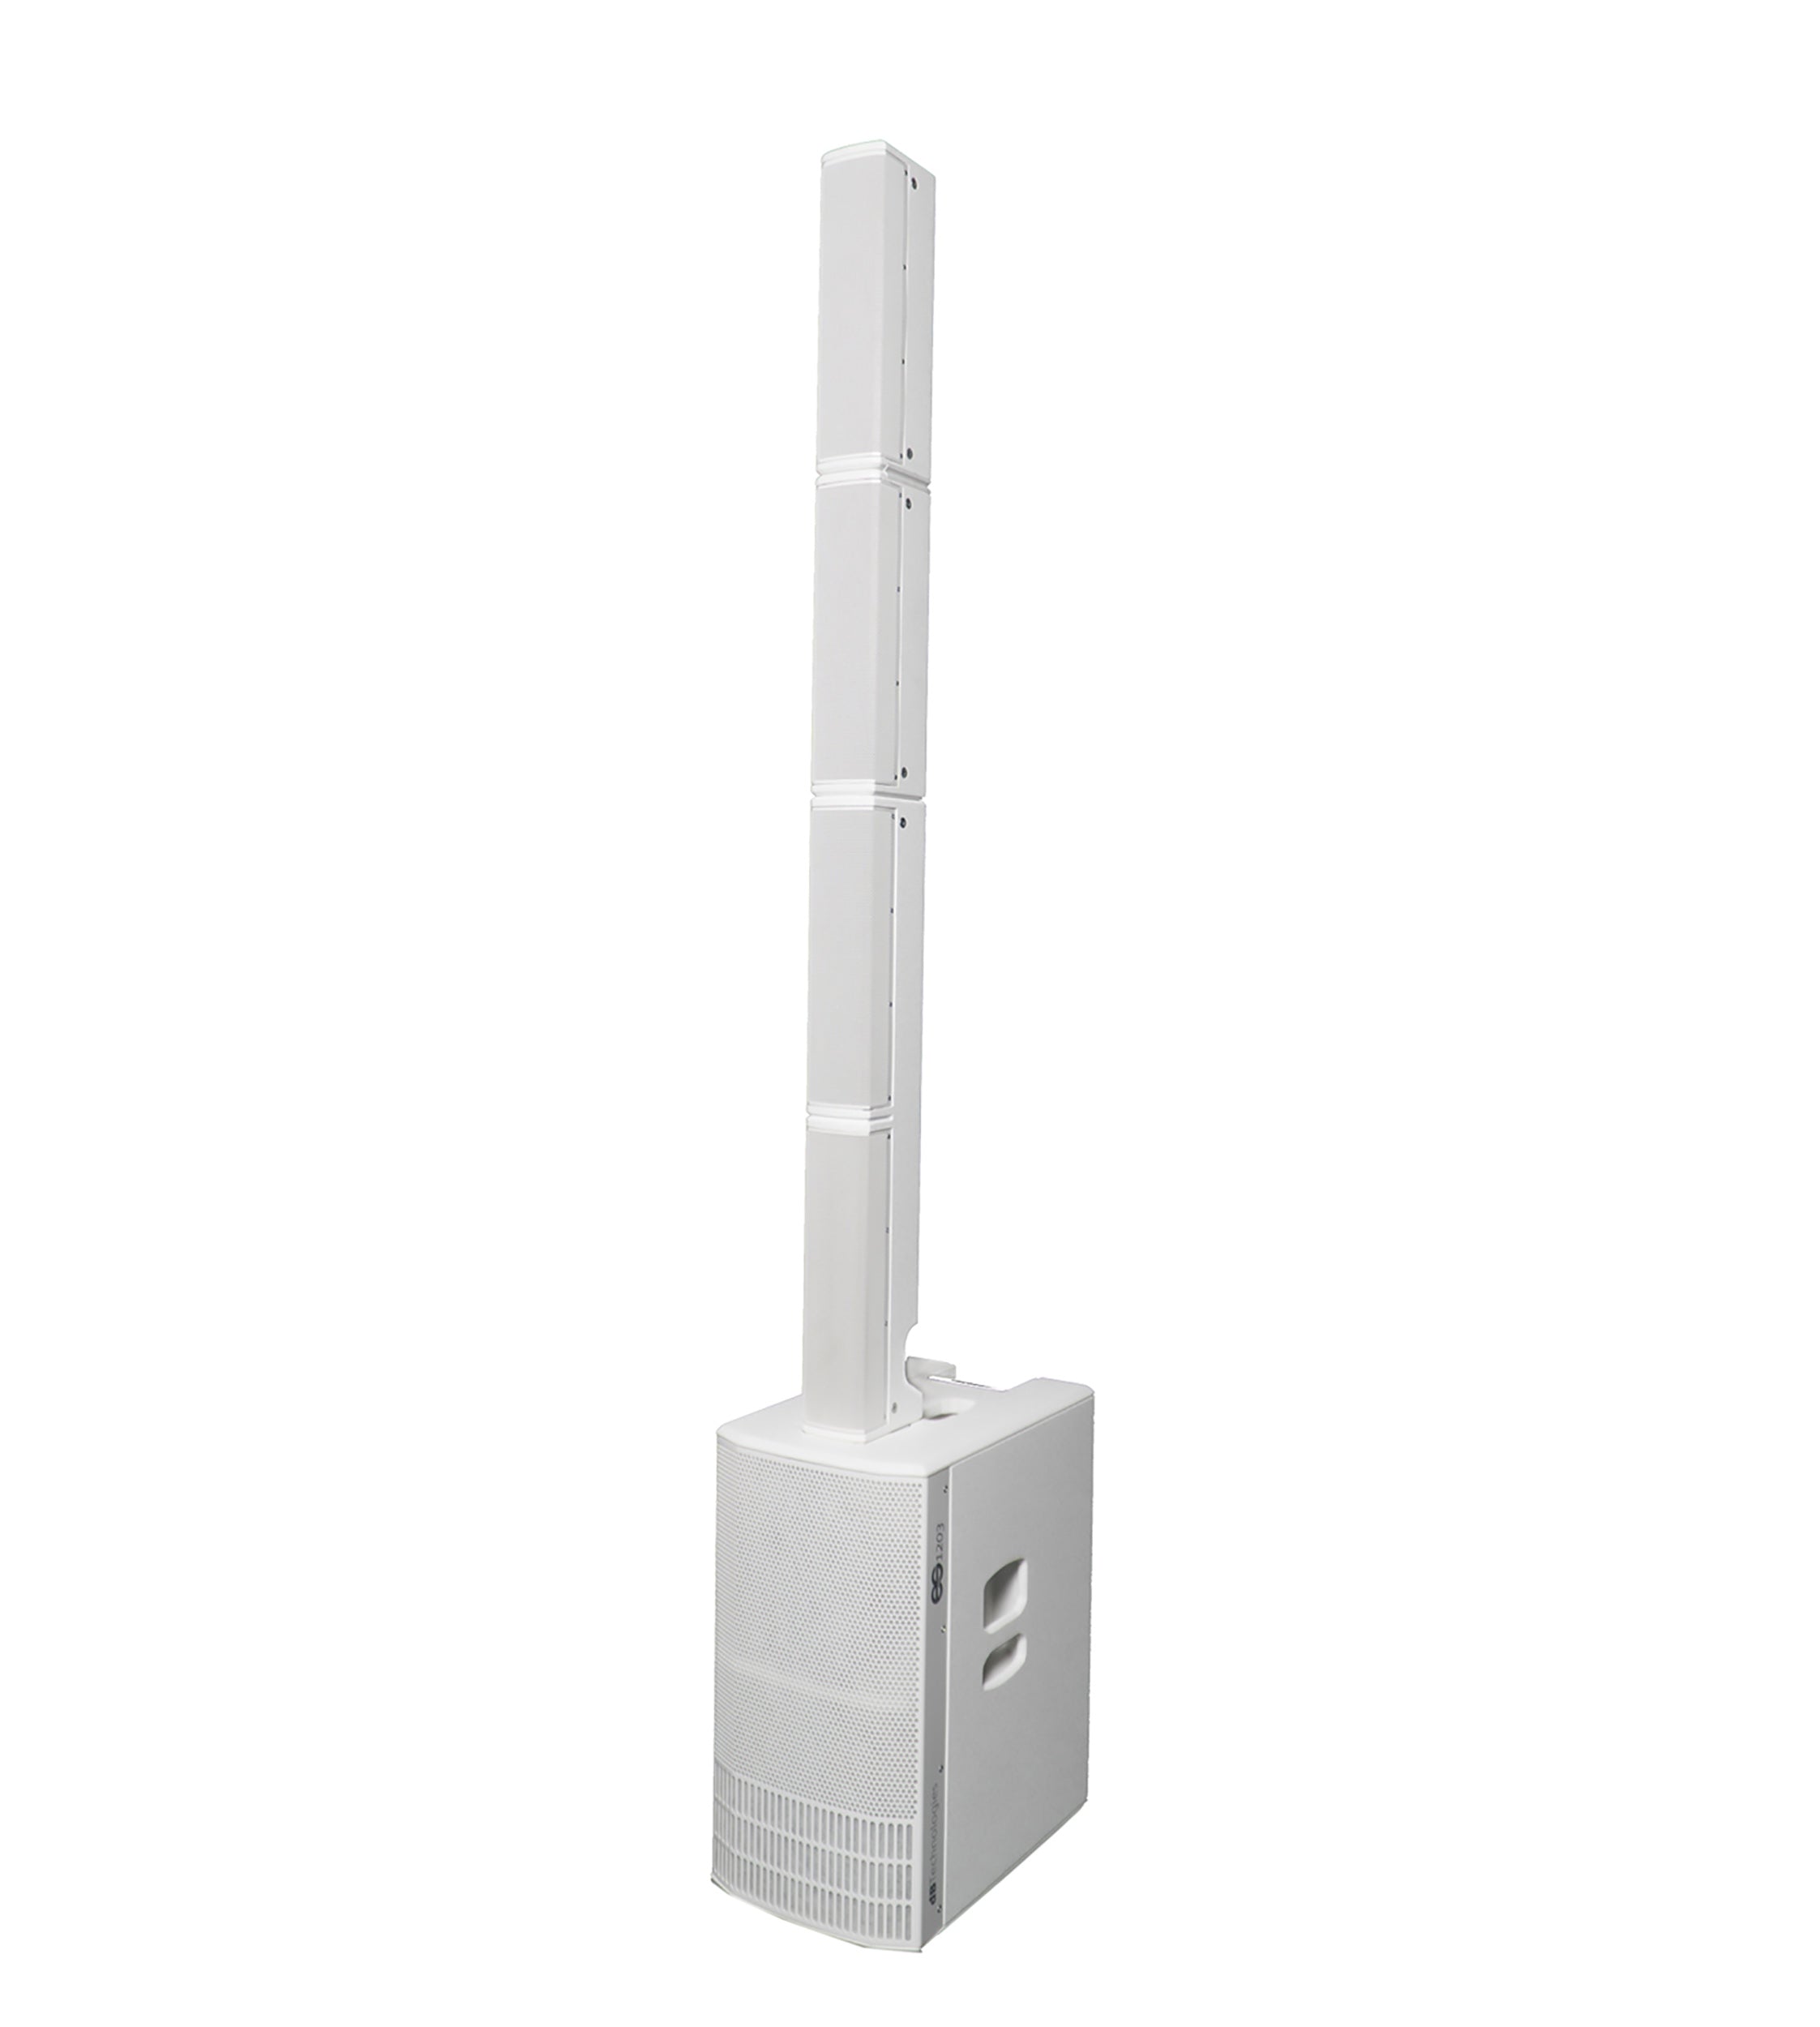 dB Technologies ES1203WDP Portable Stereo Sound System DJ Package with Design Pole - White by DB Technologies